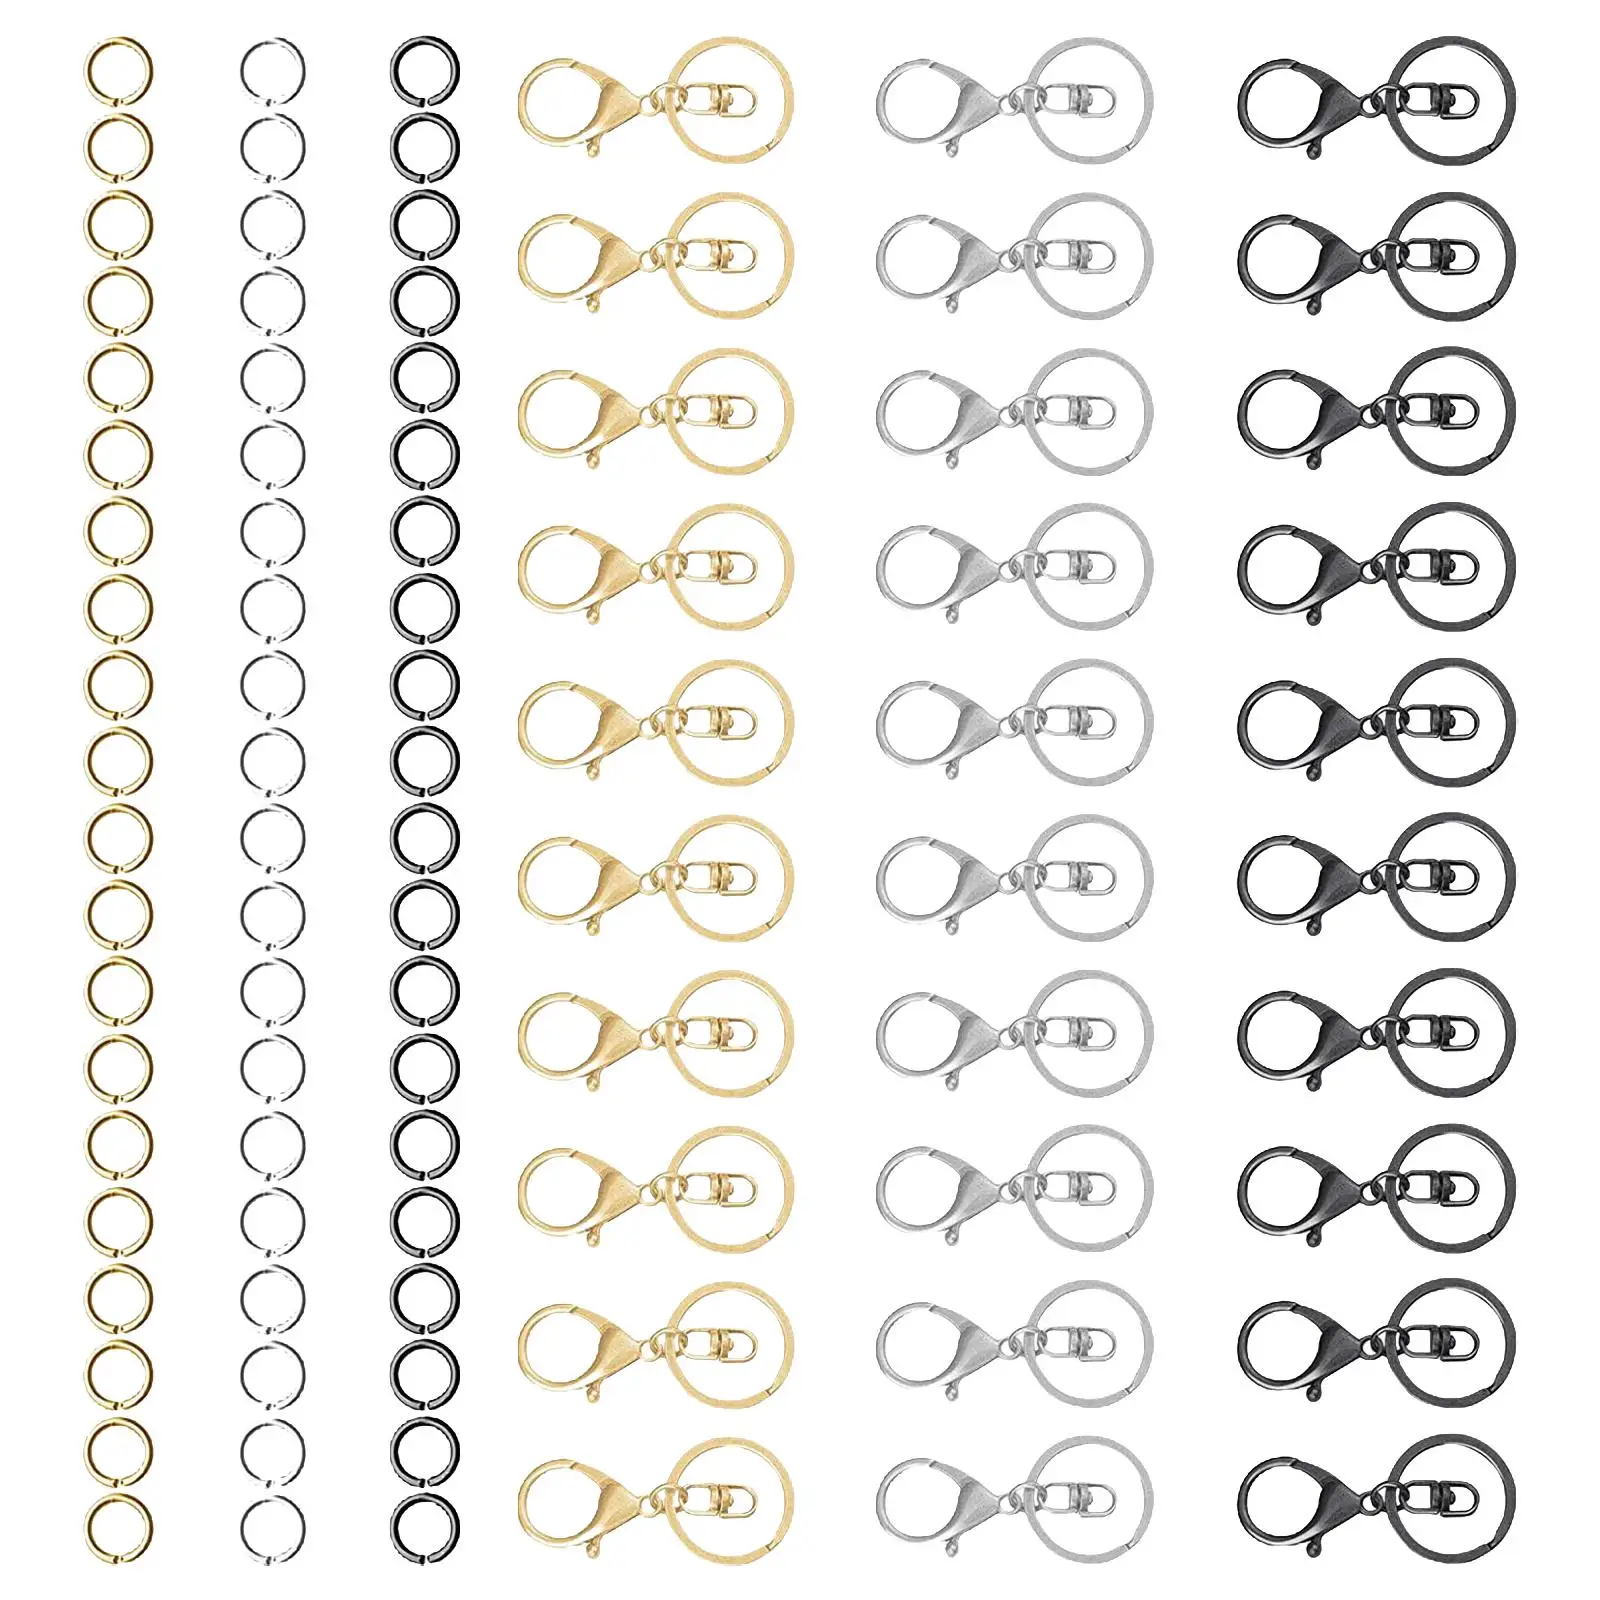 90x Lobster Claw Clasps Keychain Keys Lanyard Connector Metal Open Jump Rings for Keys Findings Bag Supplies Keyrings DIY Crafts